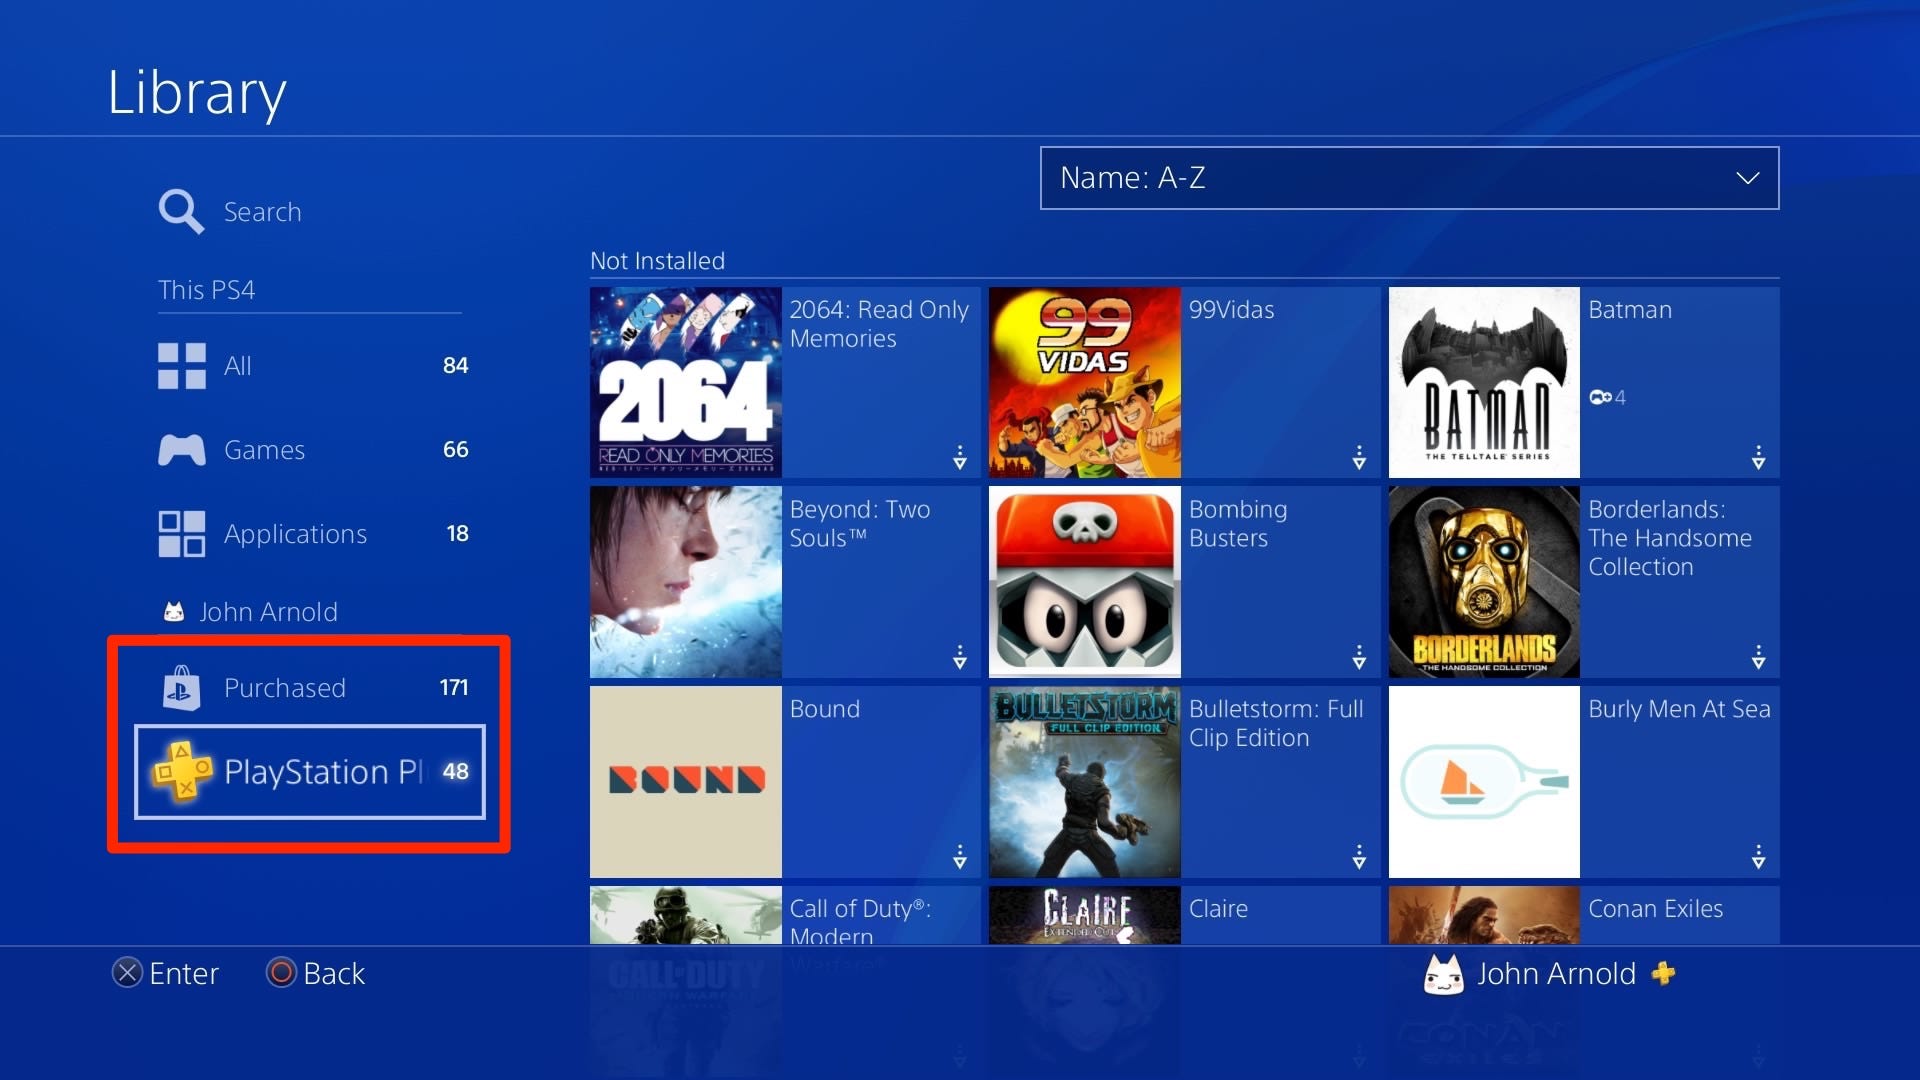 Screenshot of purchased option on PS4 screen